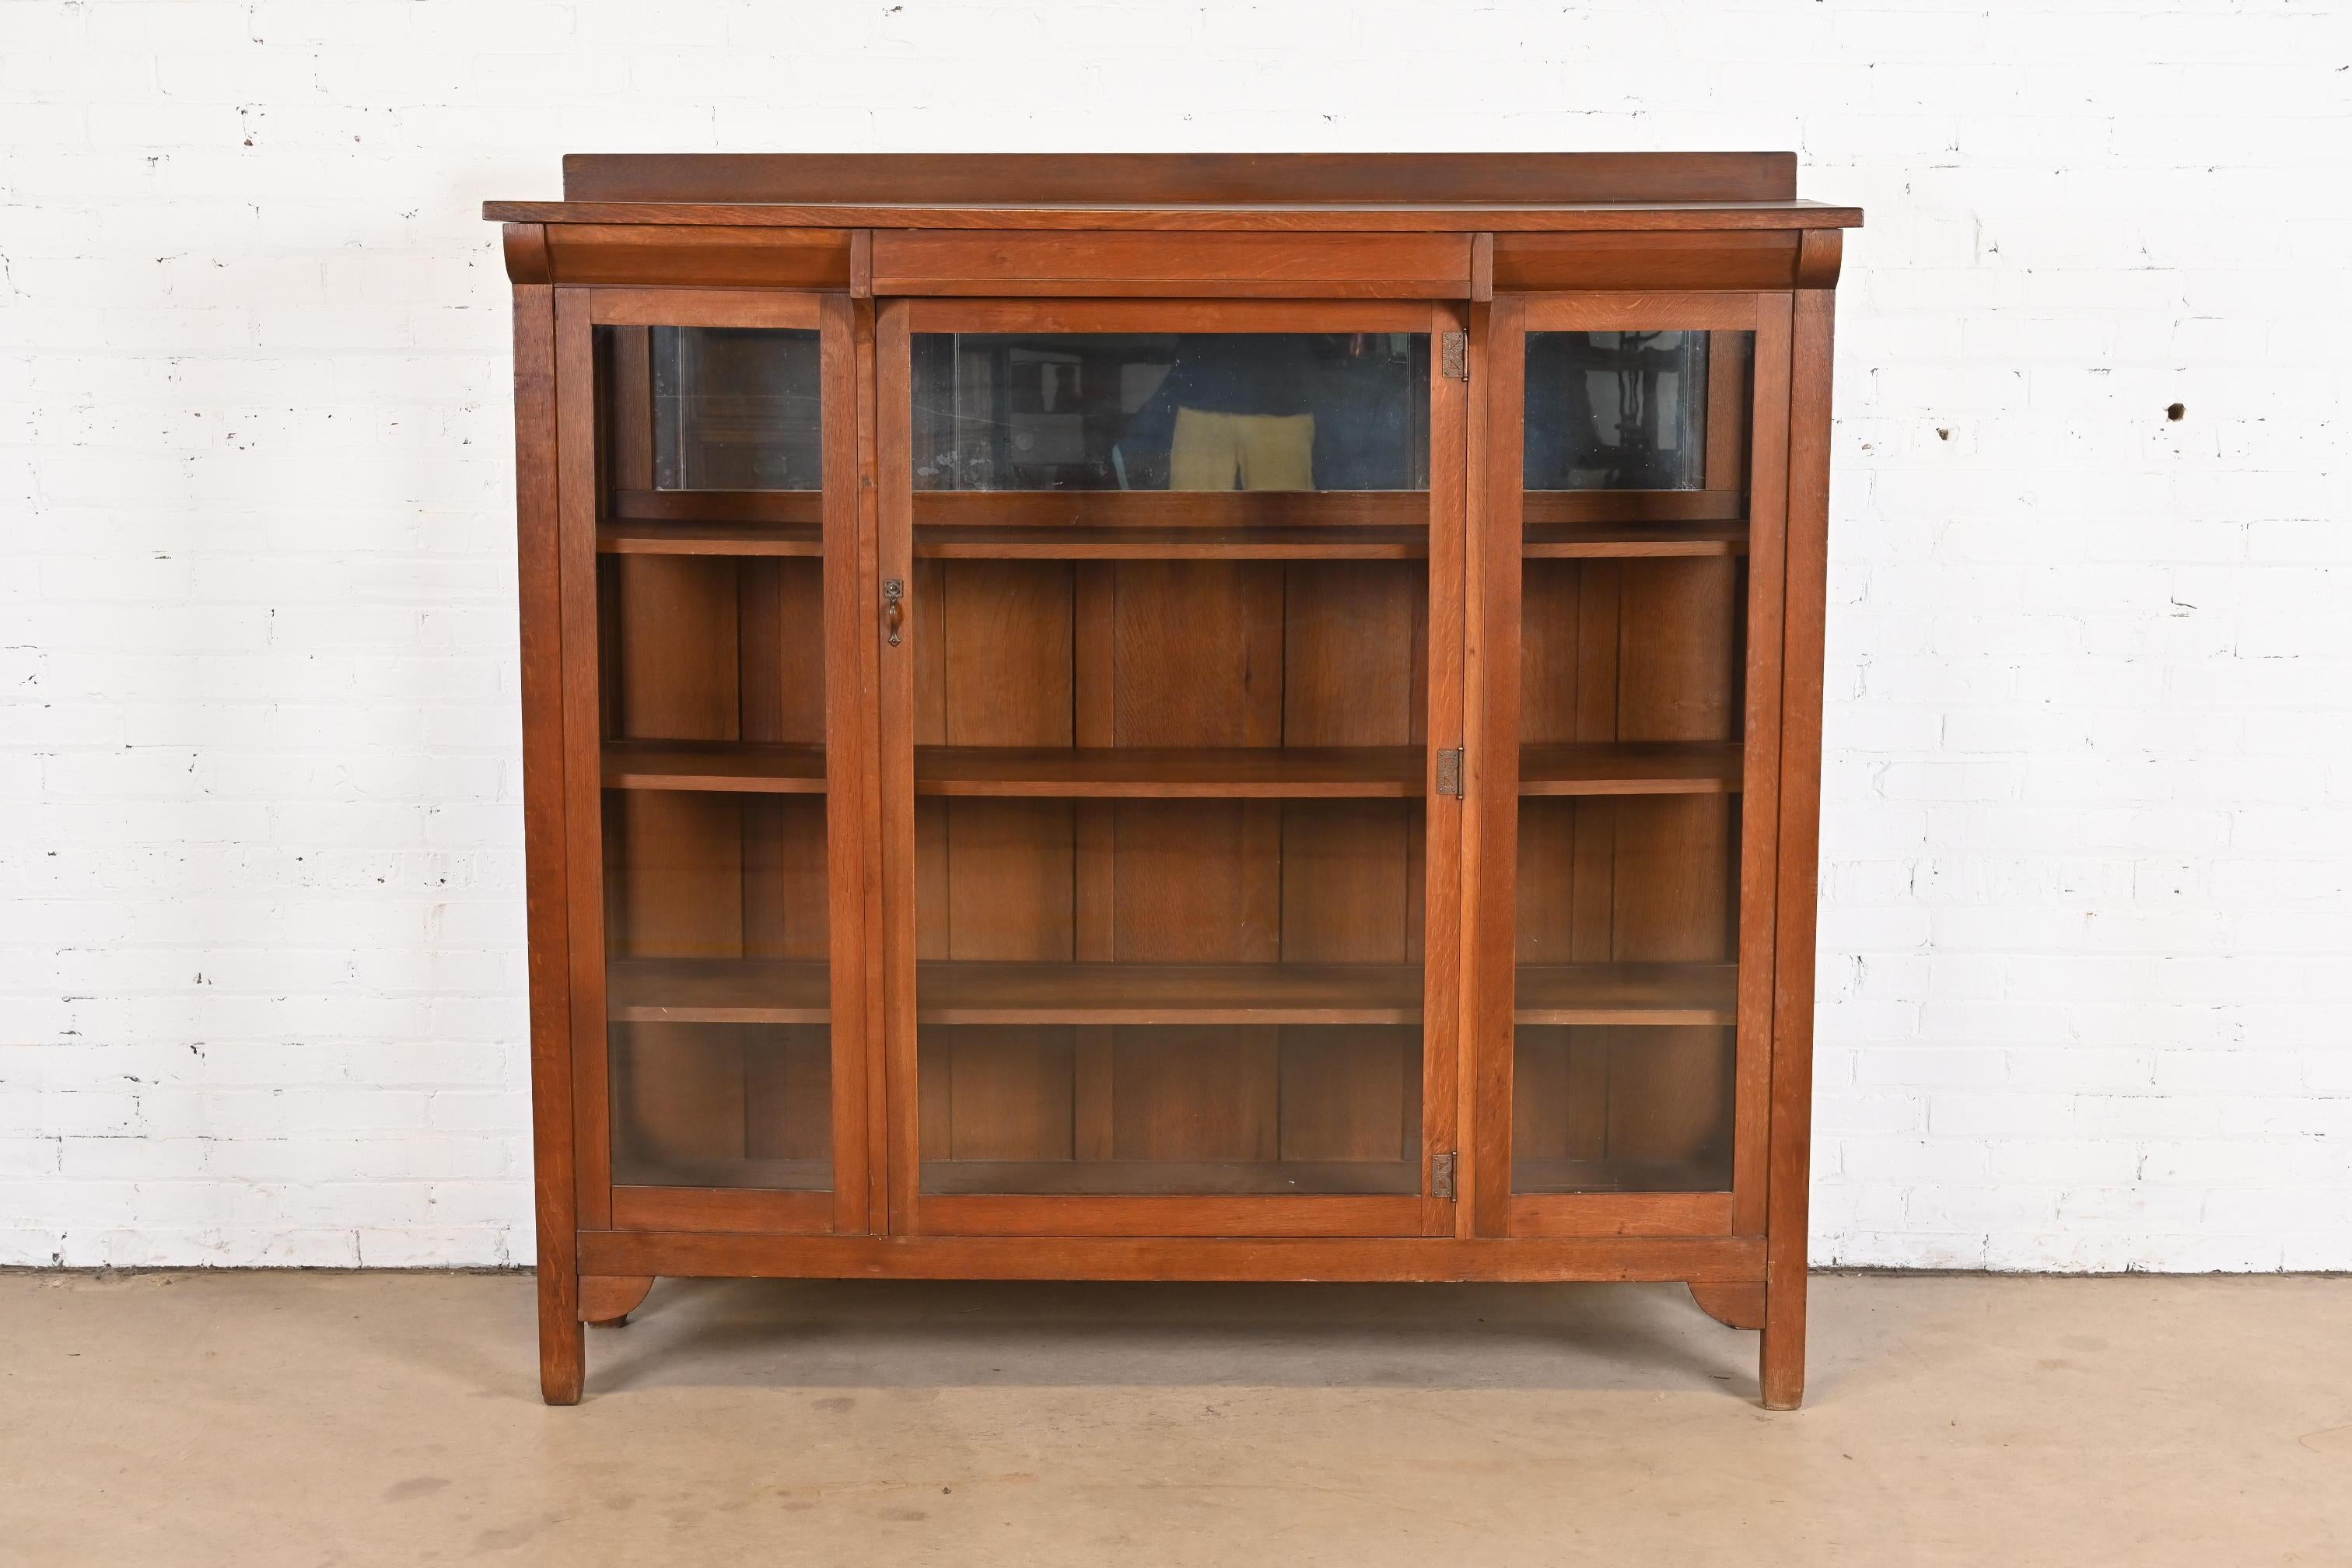 A gorgeous antique Mission or Arts & Crafts bookcase or display cabinet

By Stickley Brothers

USA, circa 1900

Carved quarter sawn oak, with glass front doors and sides, mirrored back on top shelf, and copper hardware.

Measures: 65.5